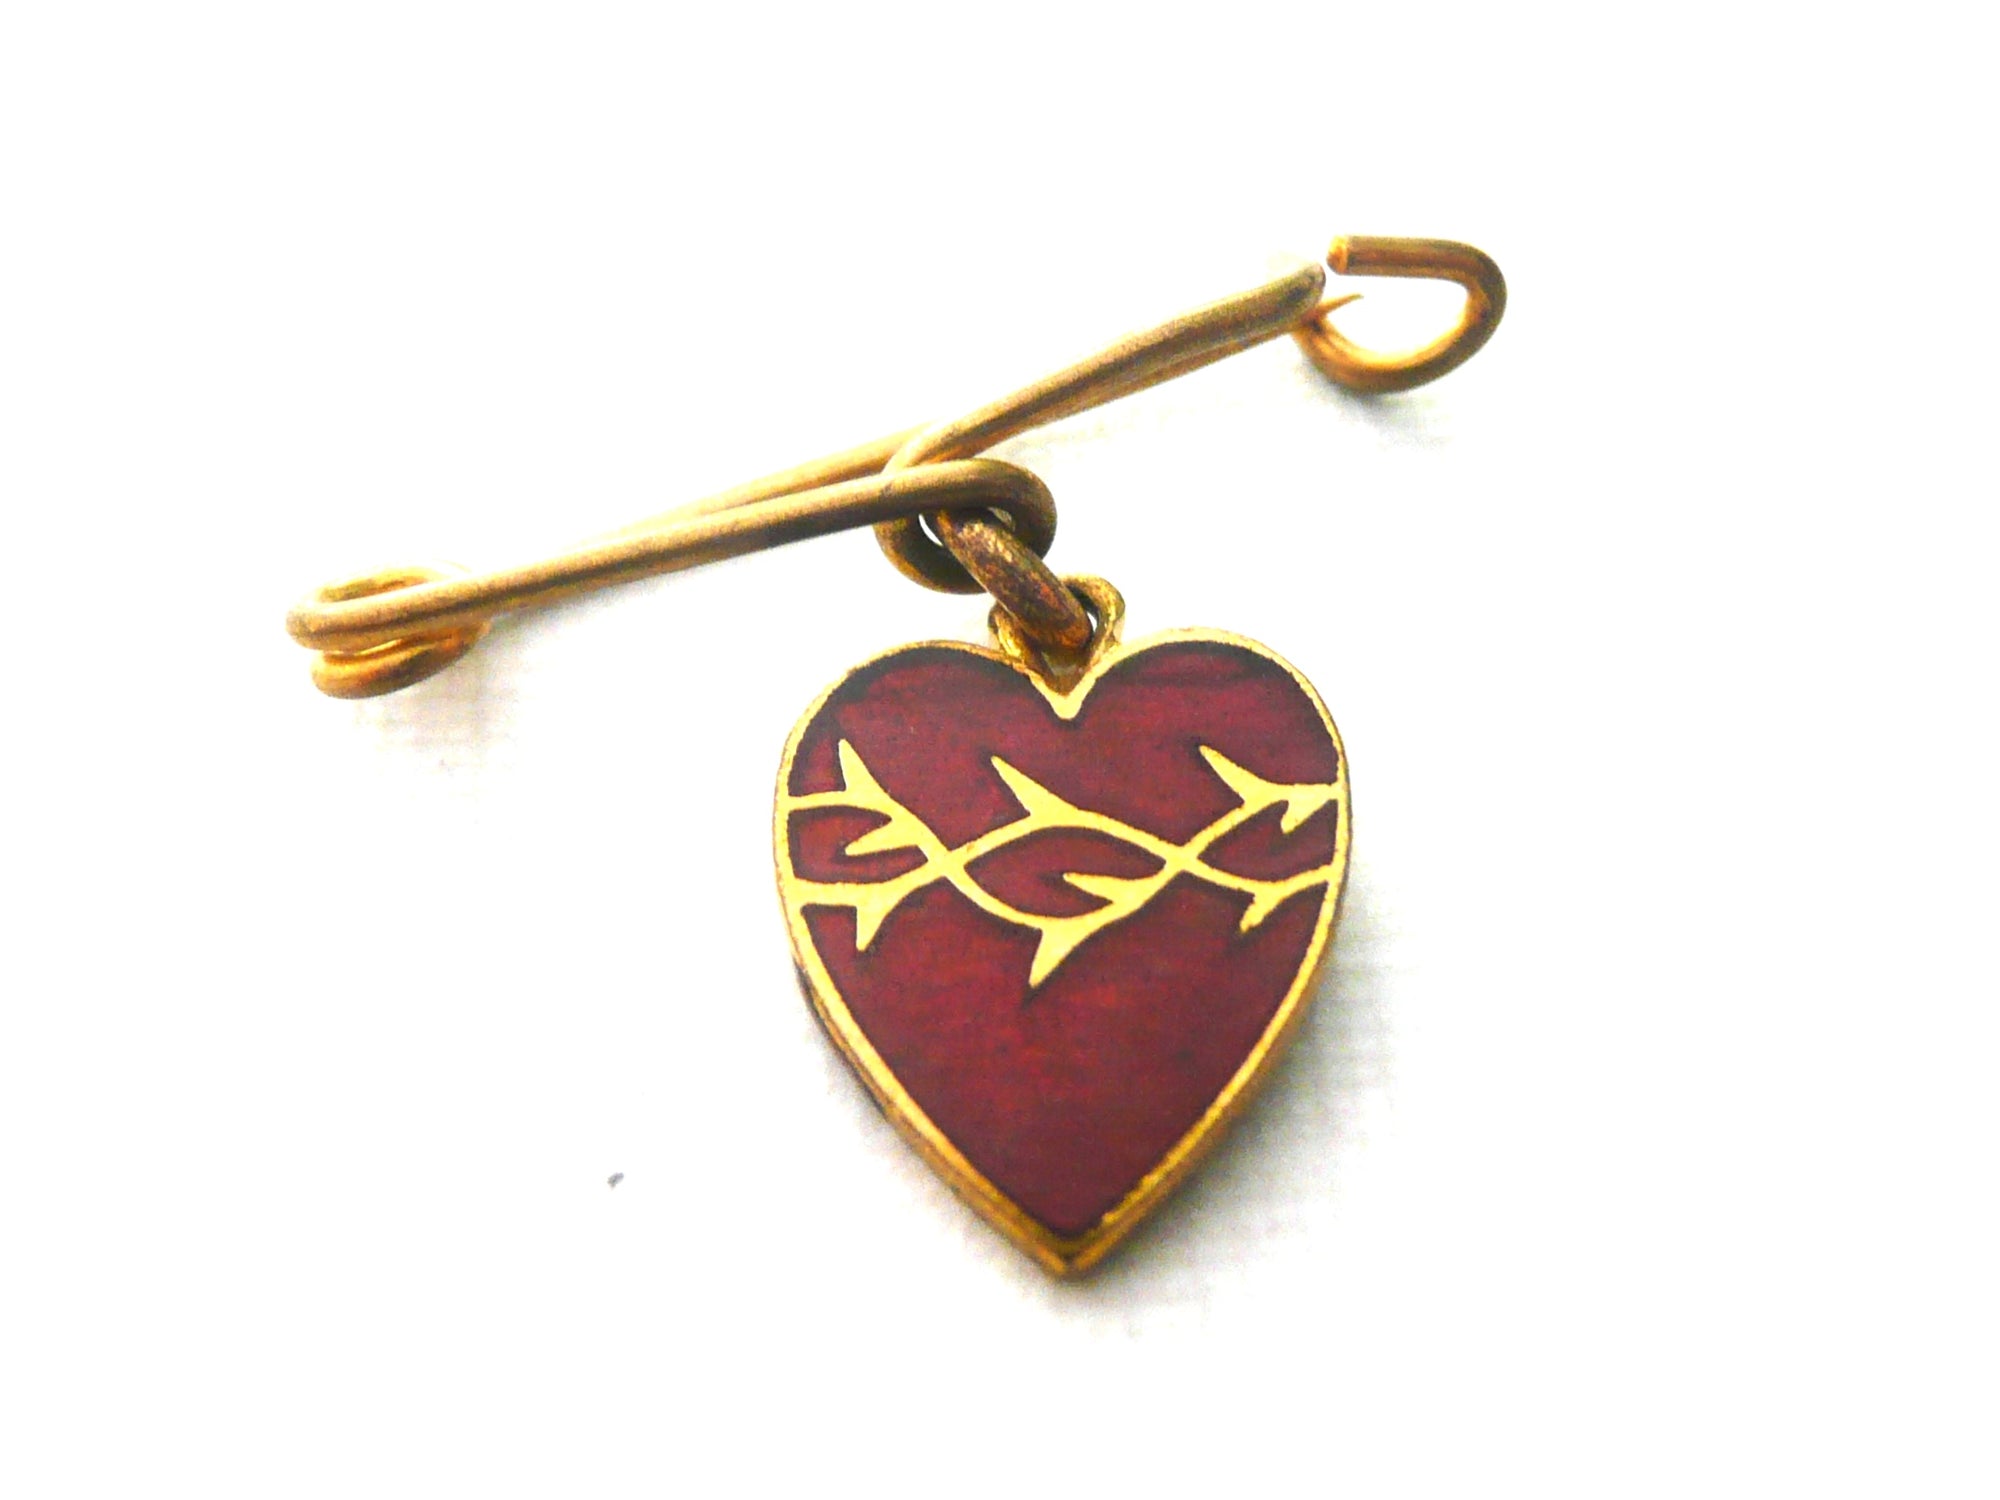 Small Vintage French Red Enamel Sacred Heart Medal